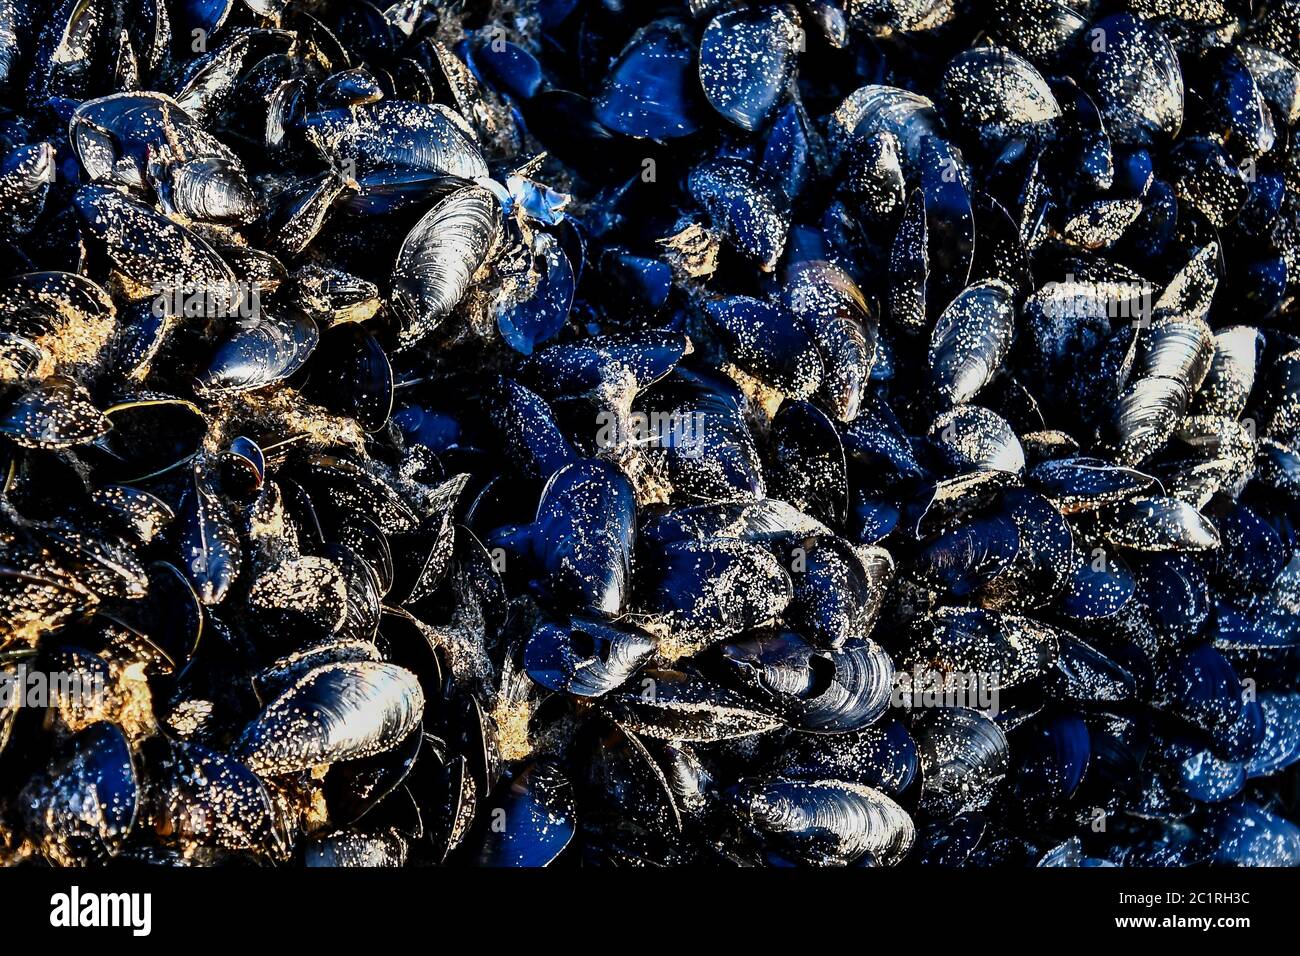 background of mussels, digital photo picture as a background Stock Photo